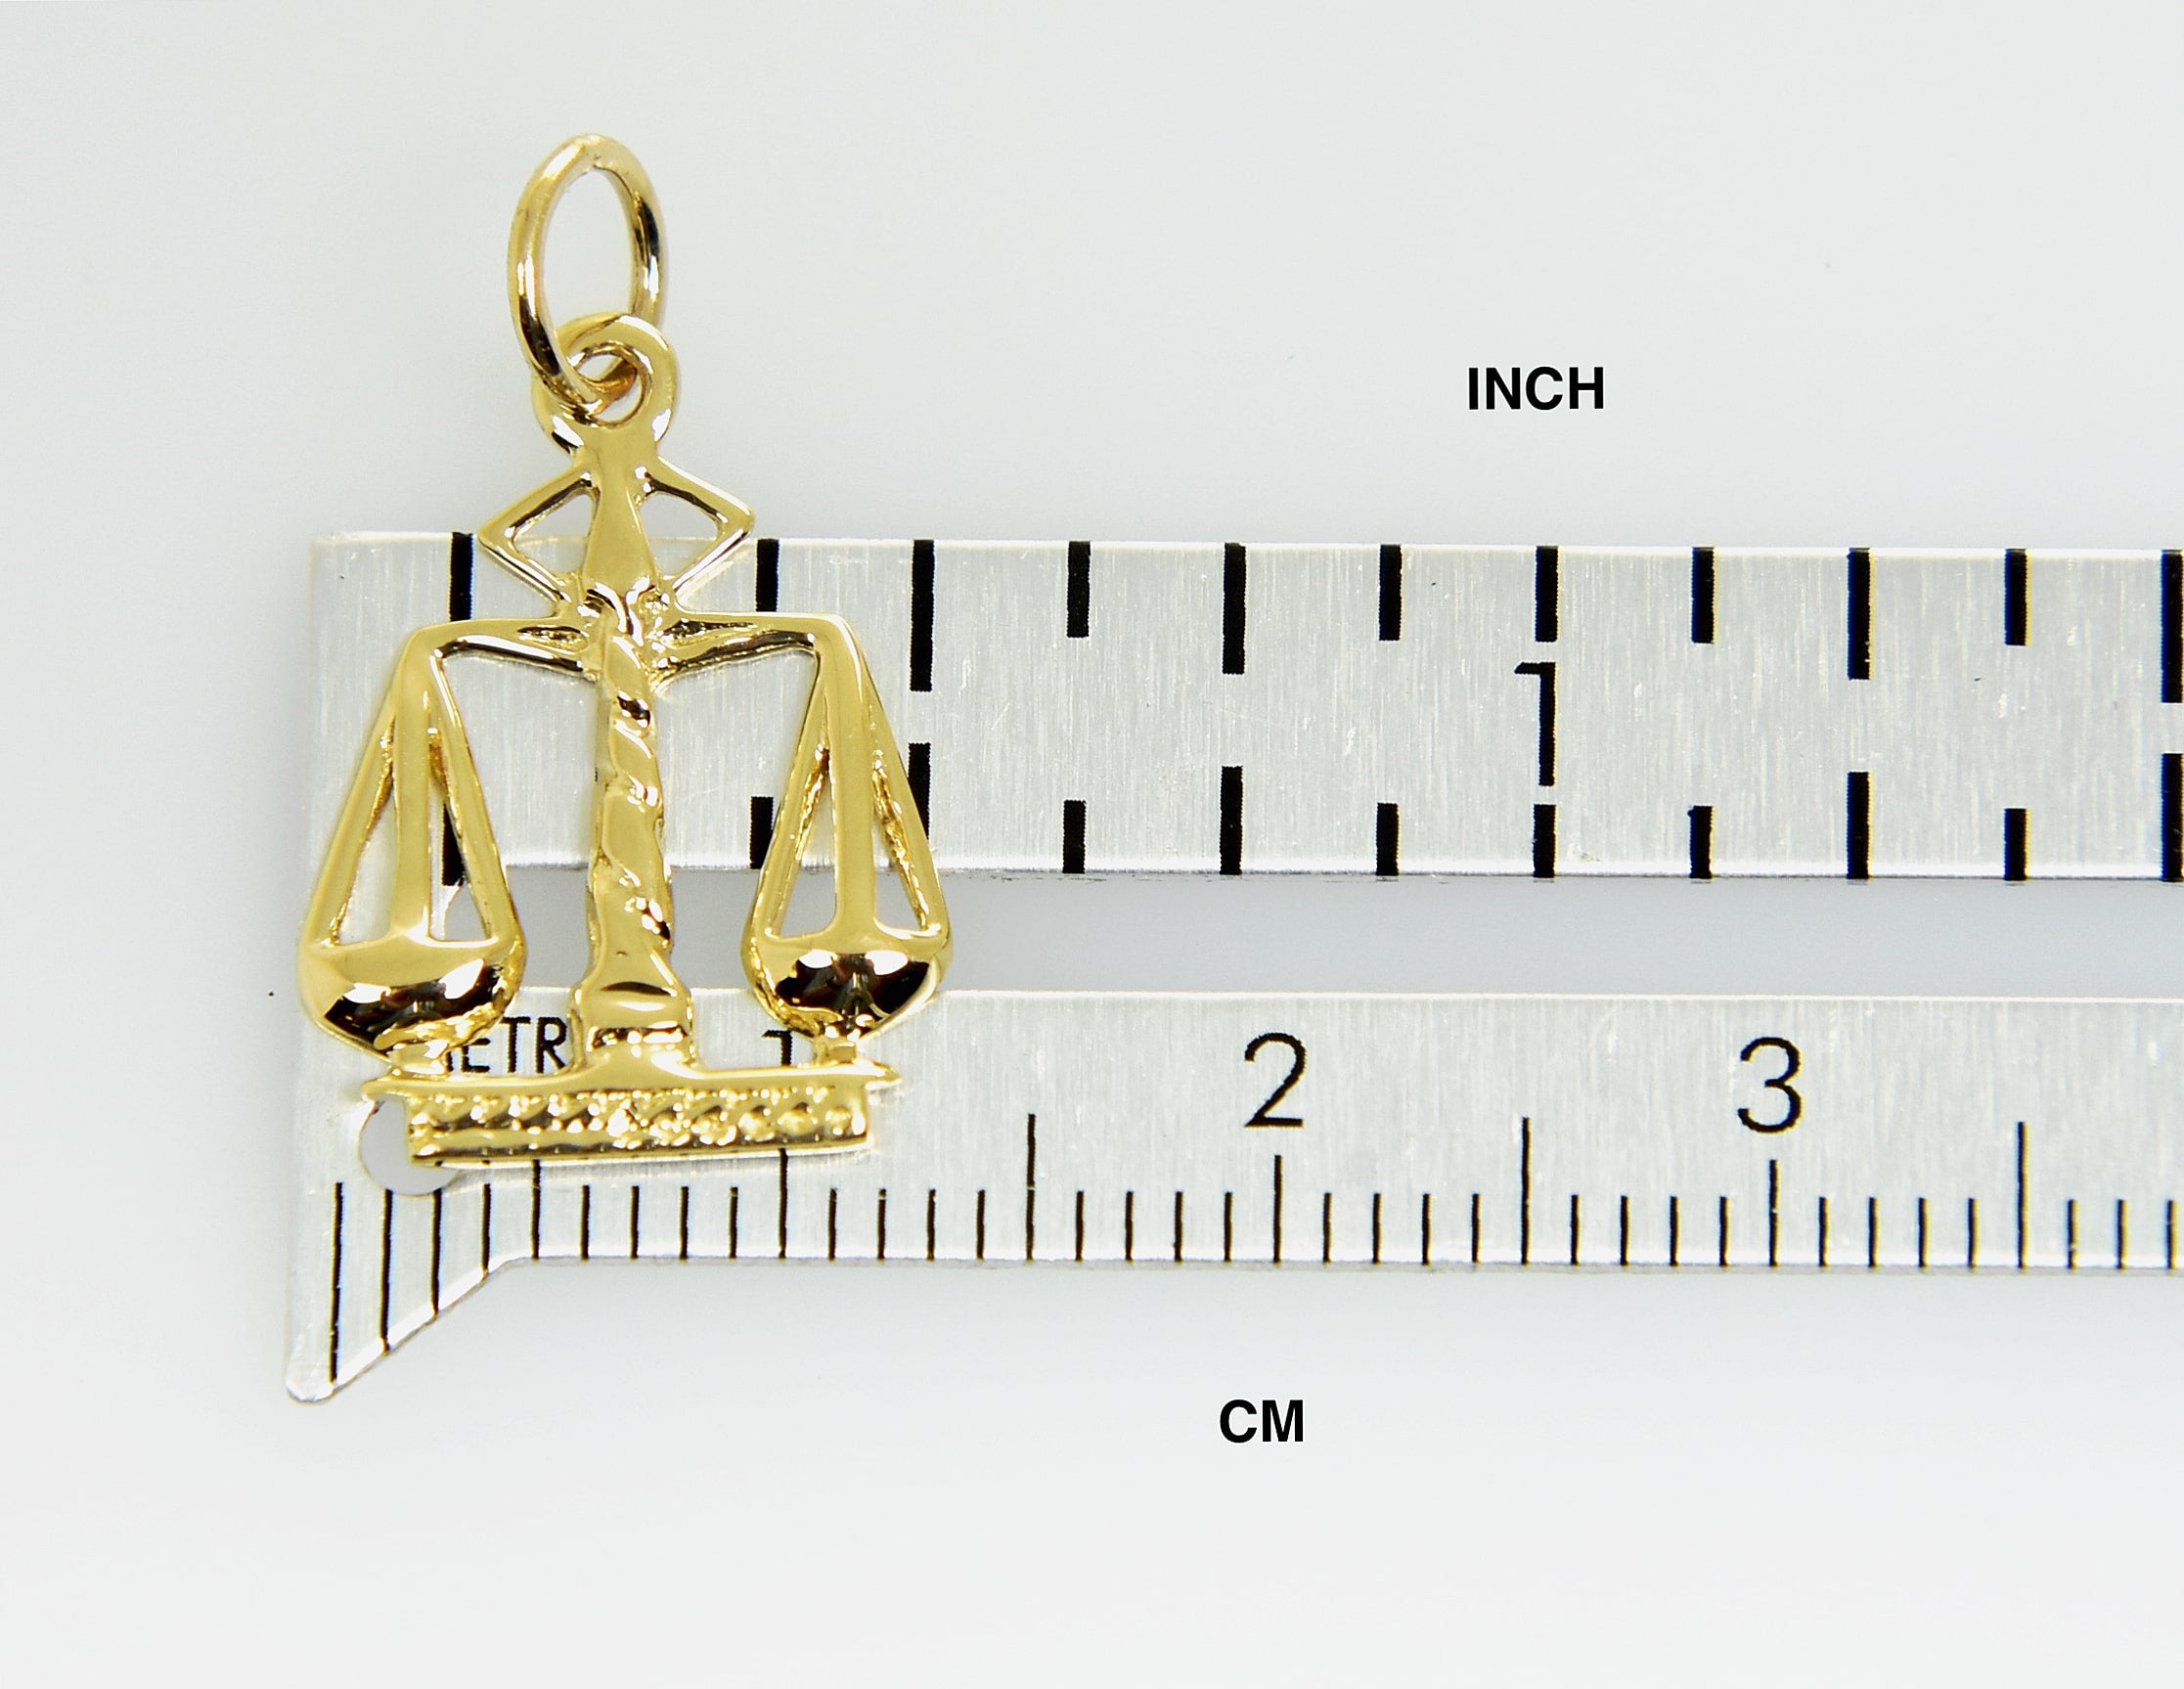 14k Yellow Gold Justice Scales Pendant Charm